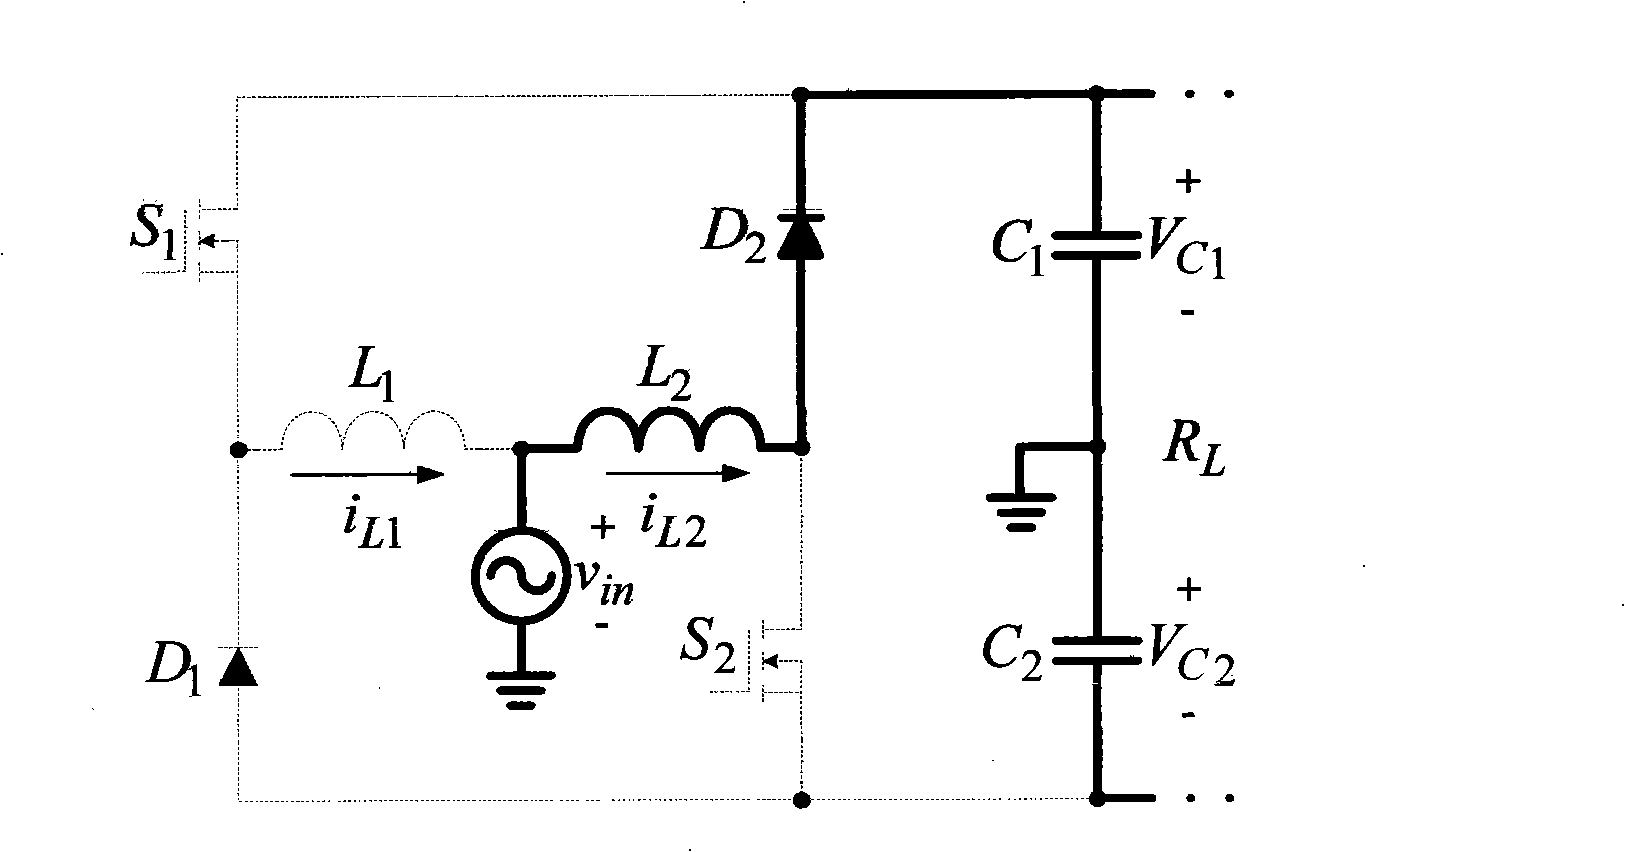 Double step-up/double step-down combined AC/AC converting circuit